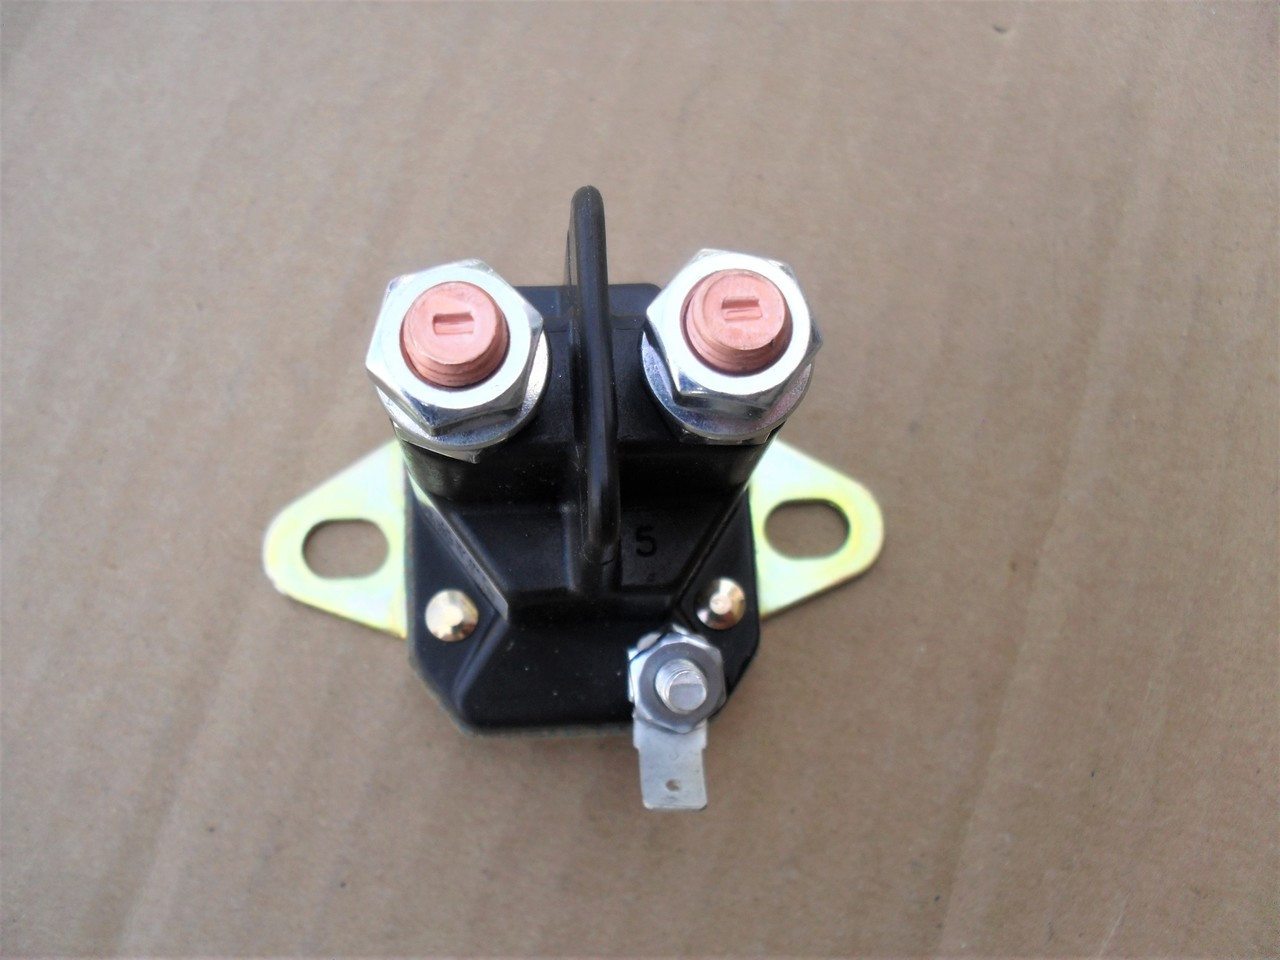 Starter Solenoid for Briggs and Stratton 691656, 745000, 745000MA, 745001, 790951, 807829, 5409D &